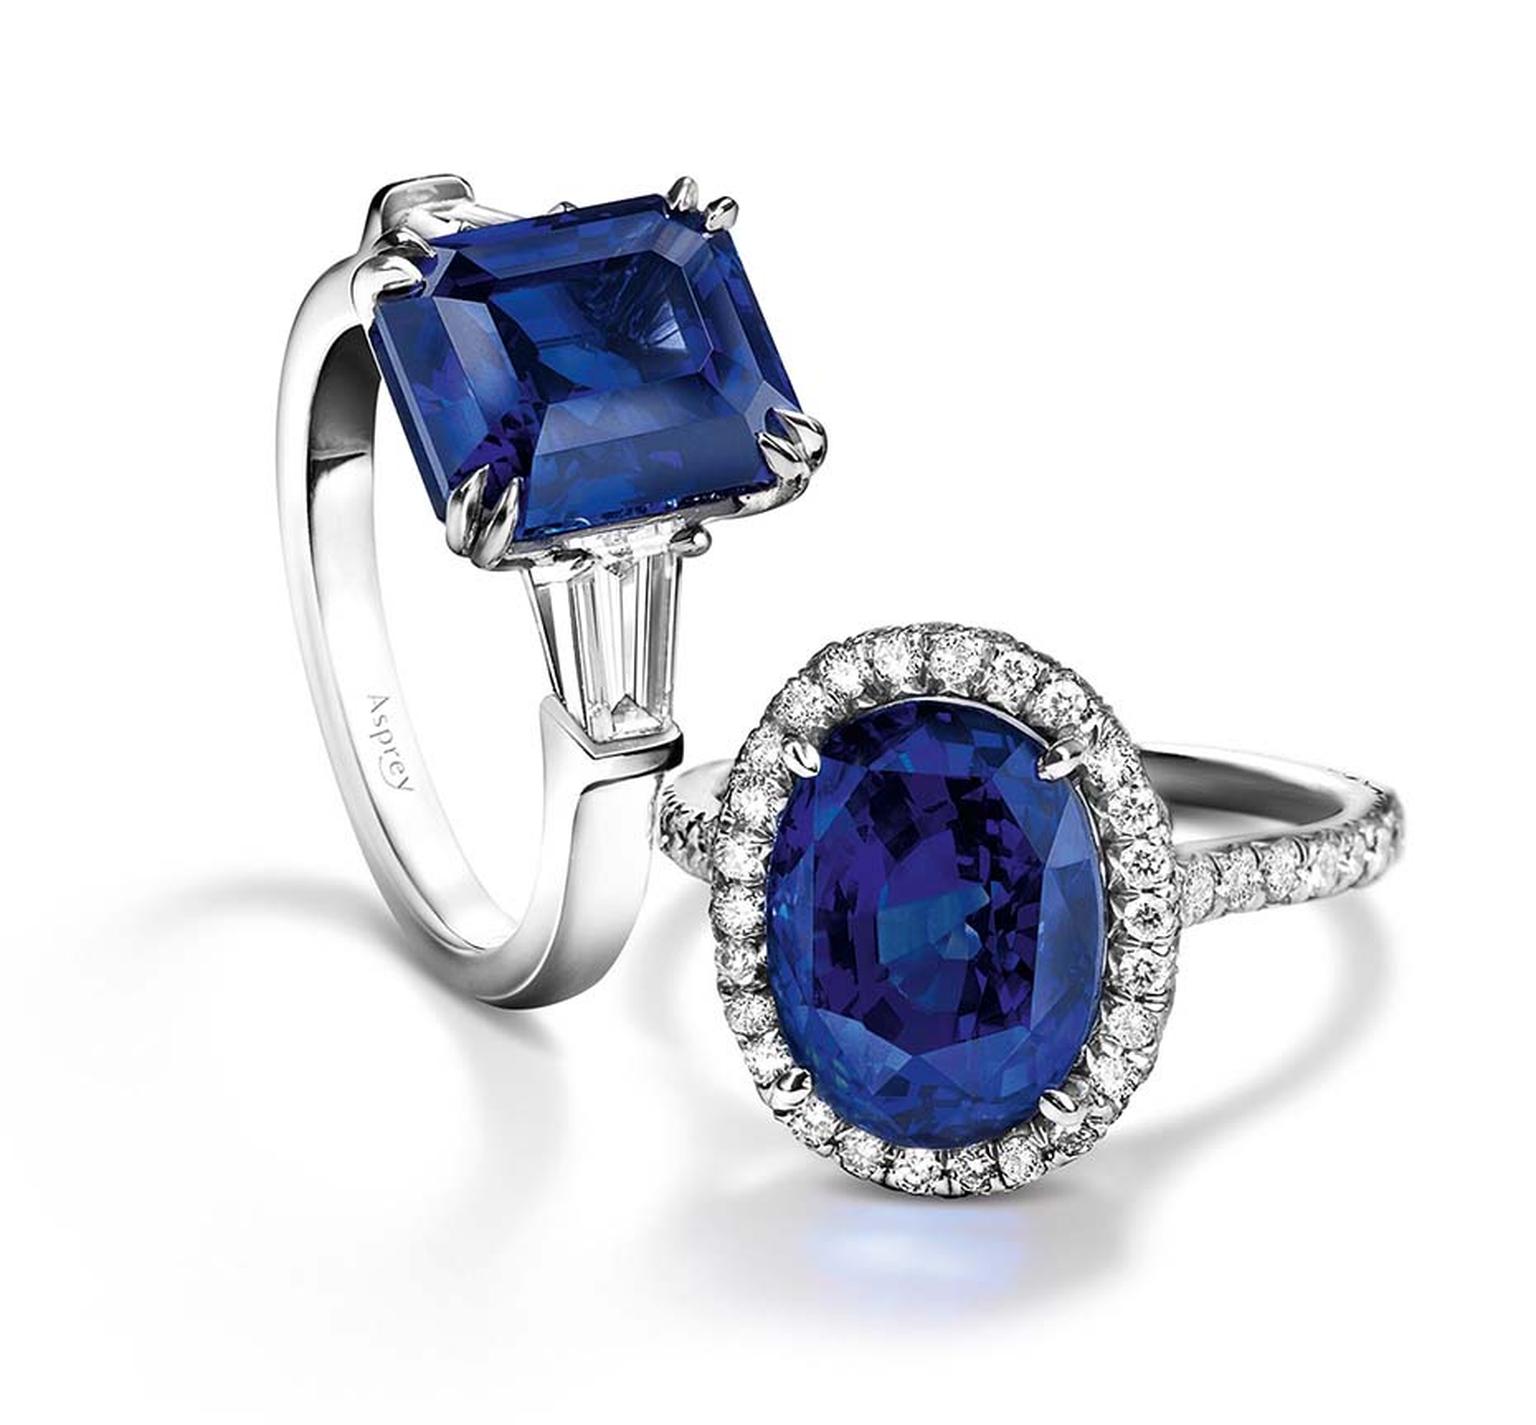 Asprey jewellery engagement rings with central sapphires.